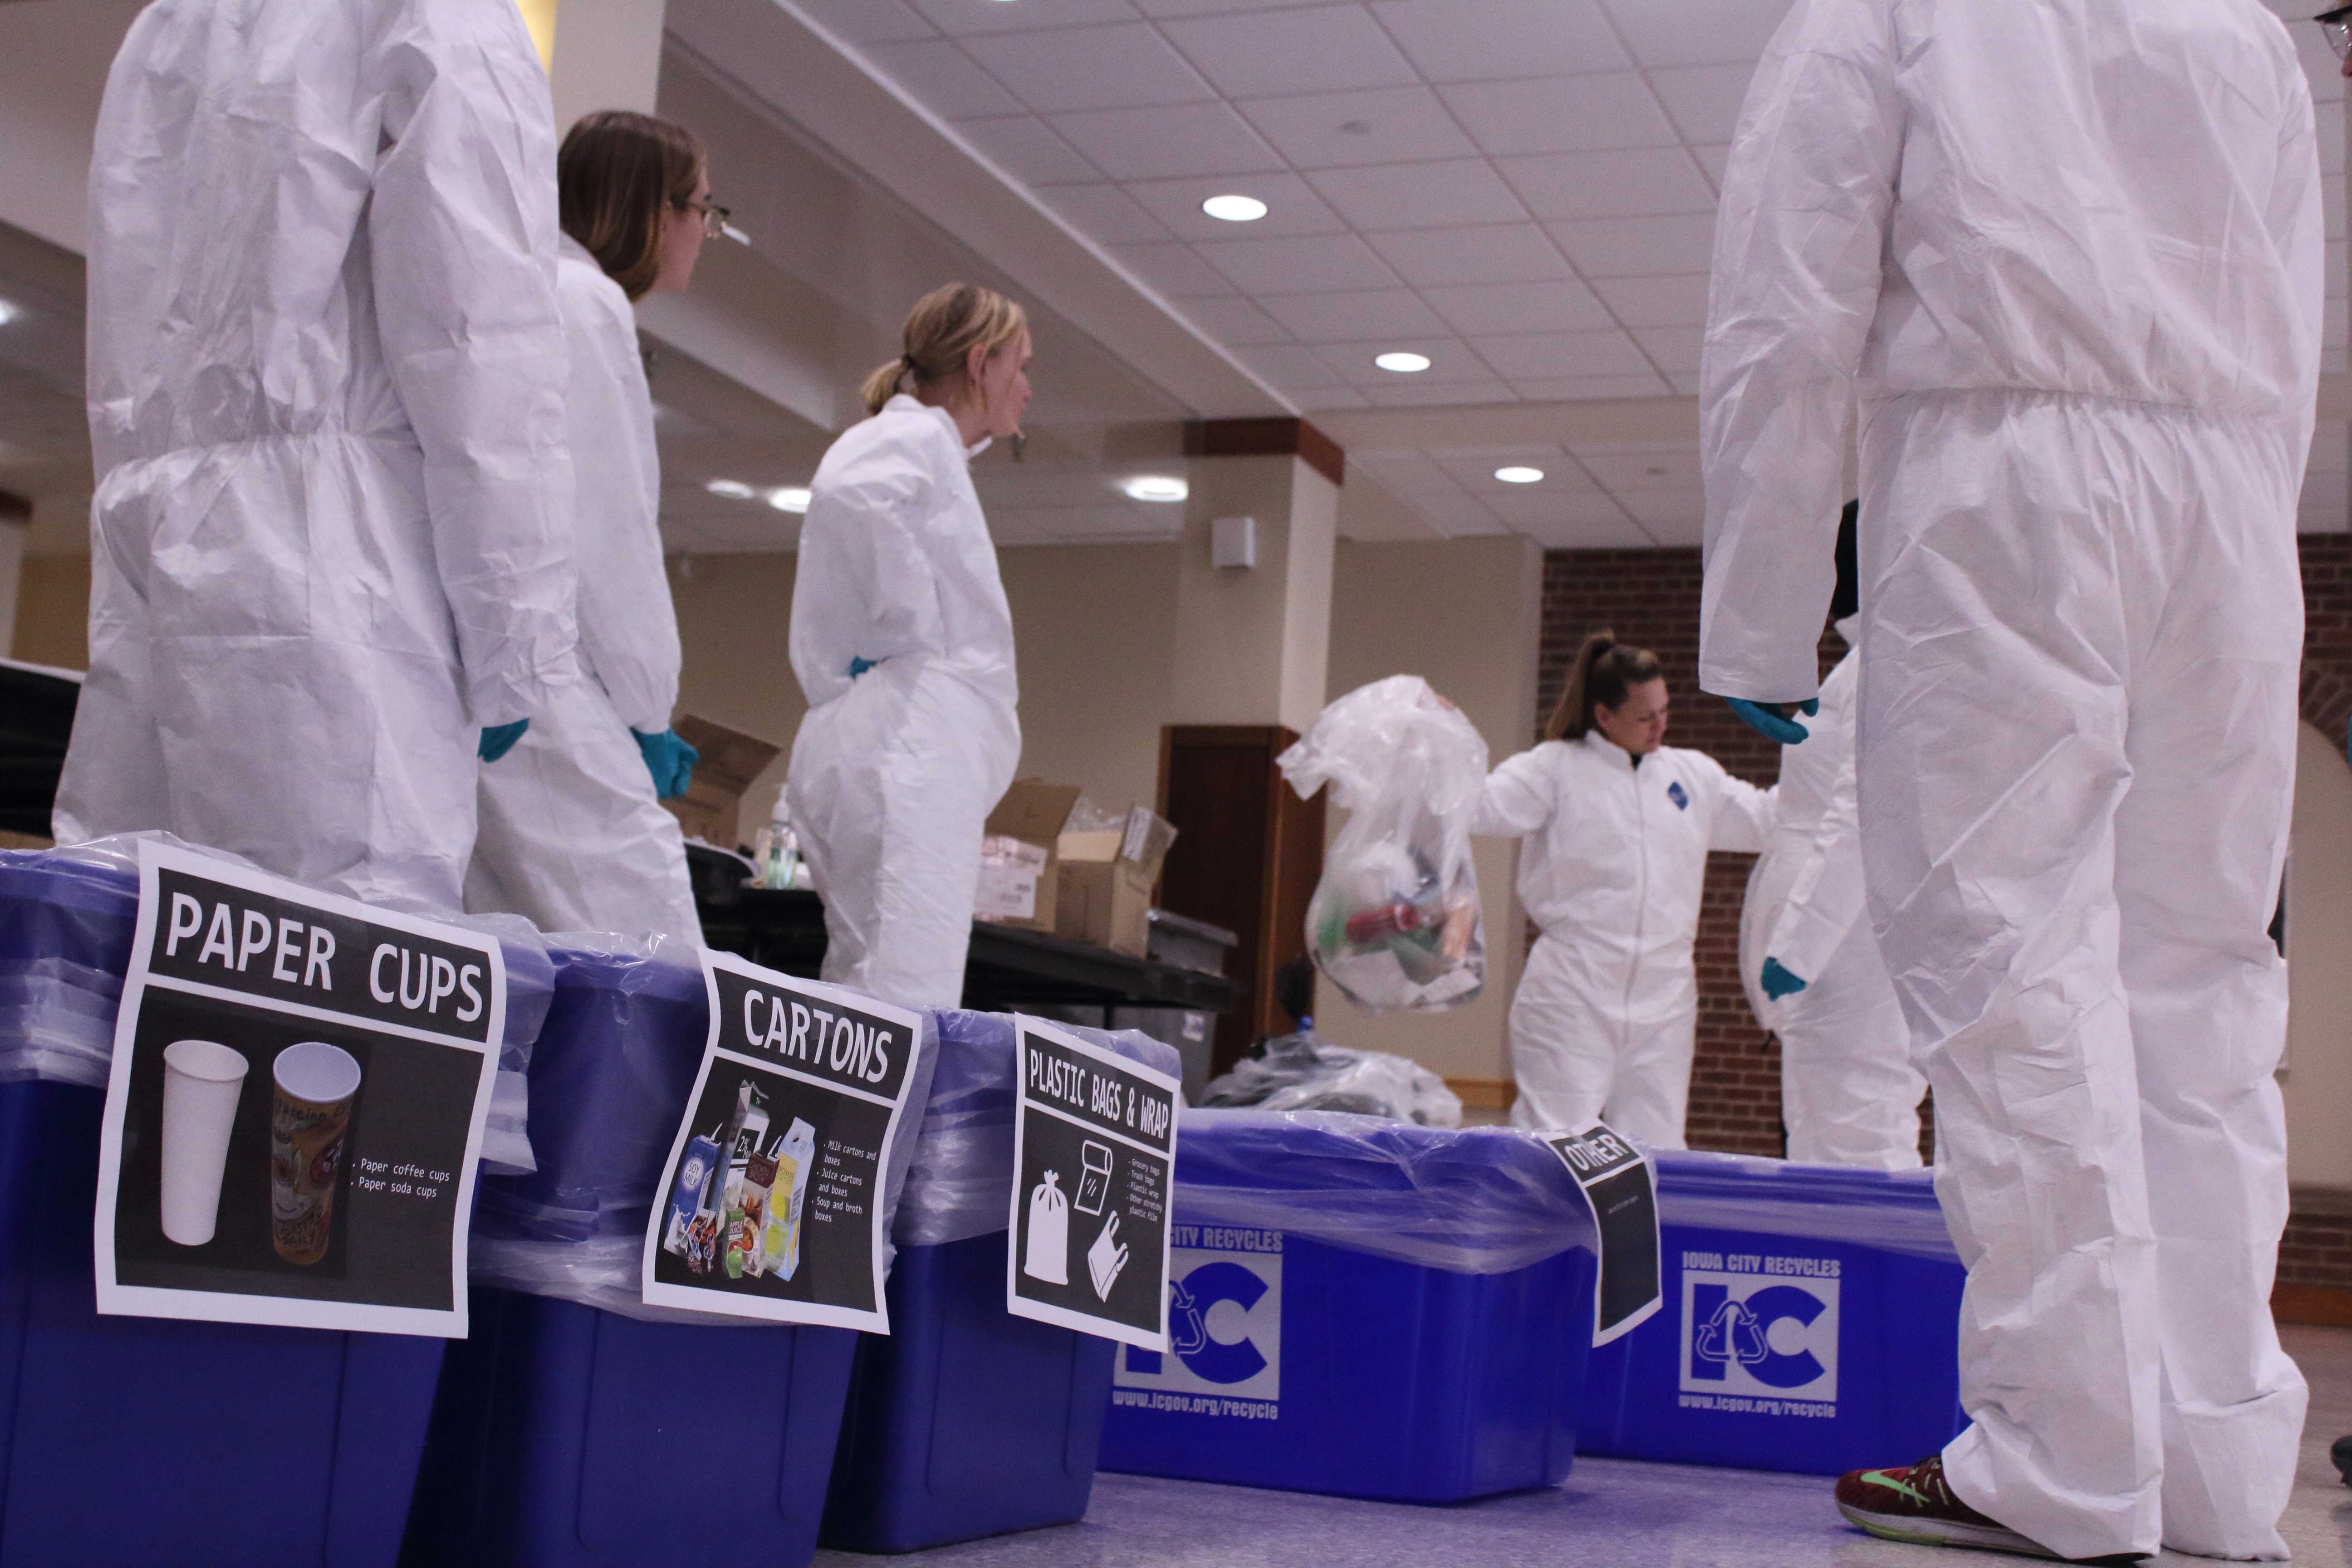 Students participate in a waste audit hosted by the Office of Sustainability in the IMU on Thursday, March 29, 2018. The data collected from the waste audit will be used to create educational campaigns to help the University of Iowa be better at recycling.  (Ashley Morris/The Daily Iowan)